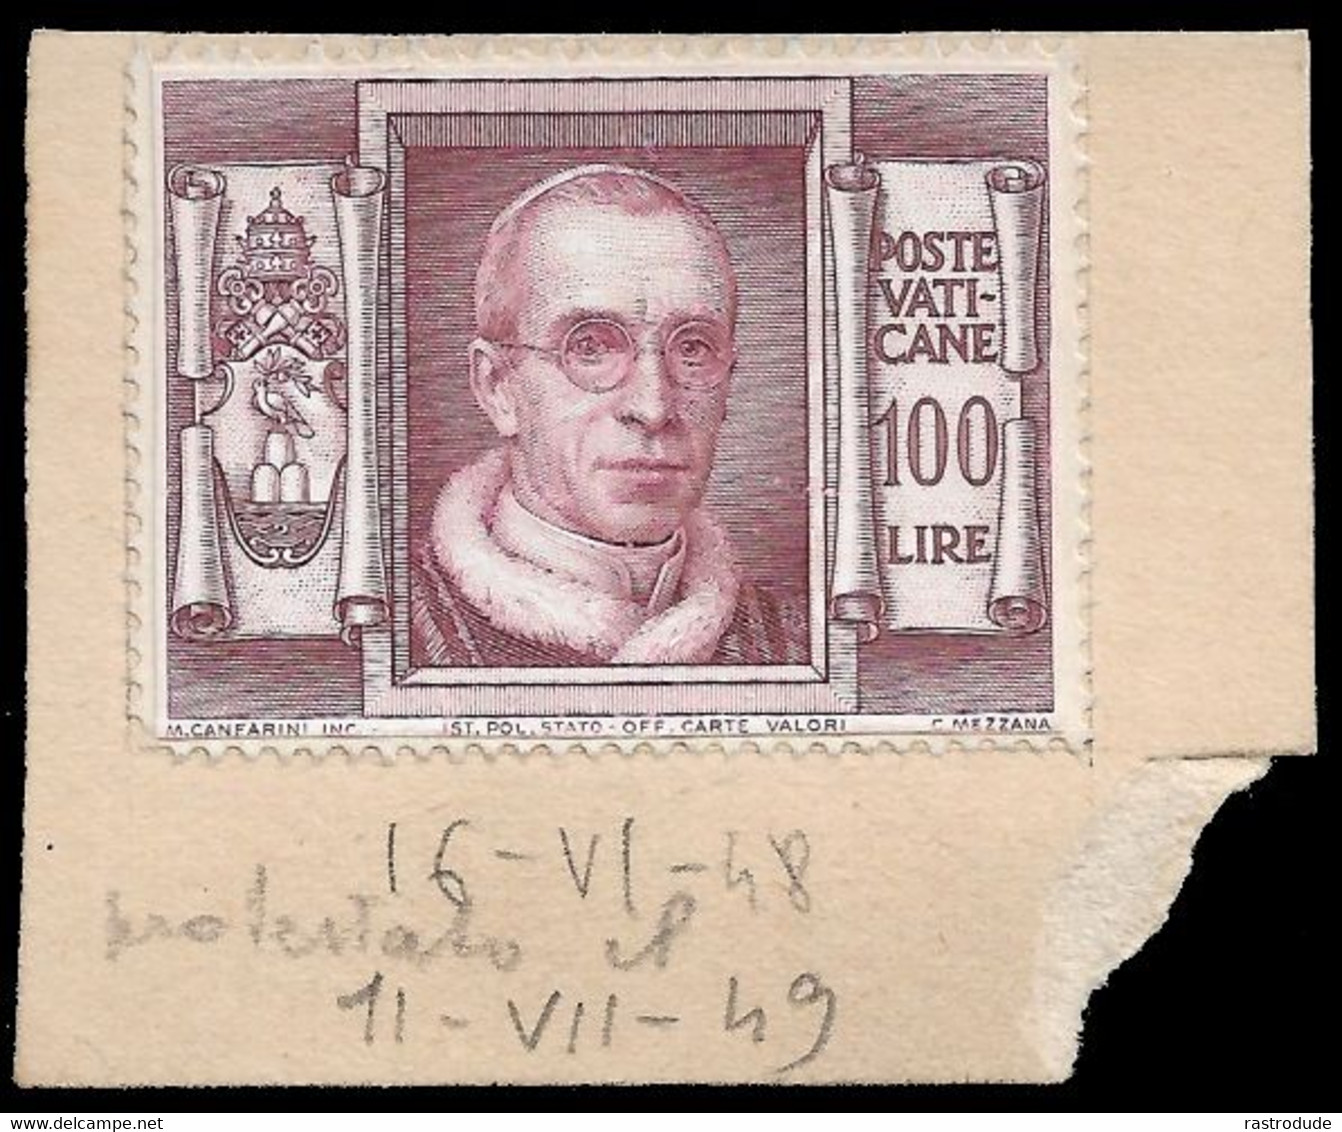 VATICAN CITY - 1948 VERY RARE PROOF / PROVE 100L (Sassone 131) NOT ISSUED COLOR - POPE PIUS XII - Nuovi